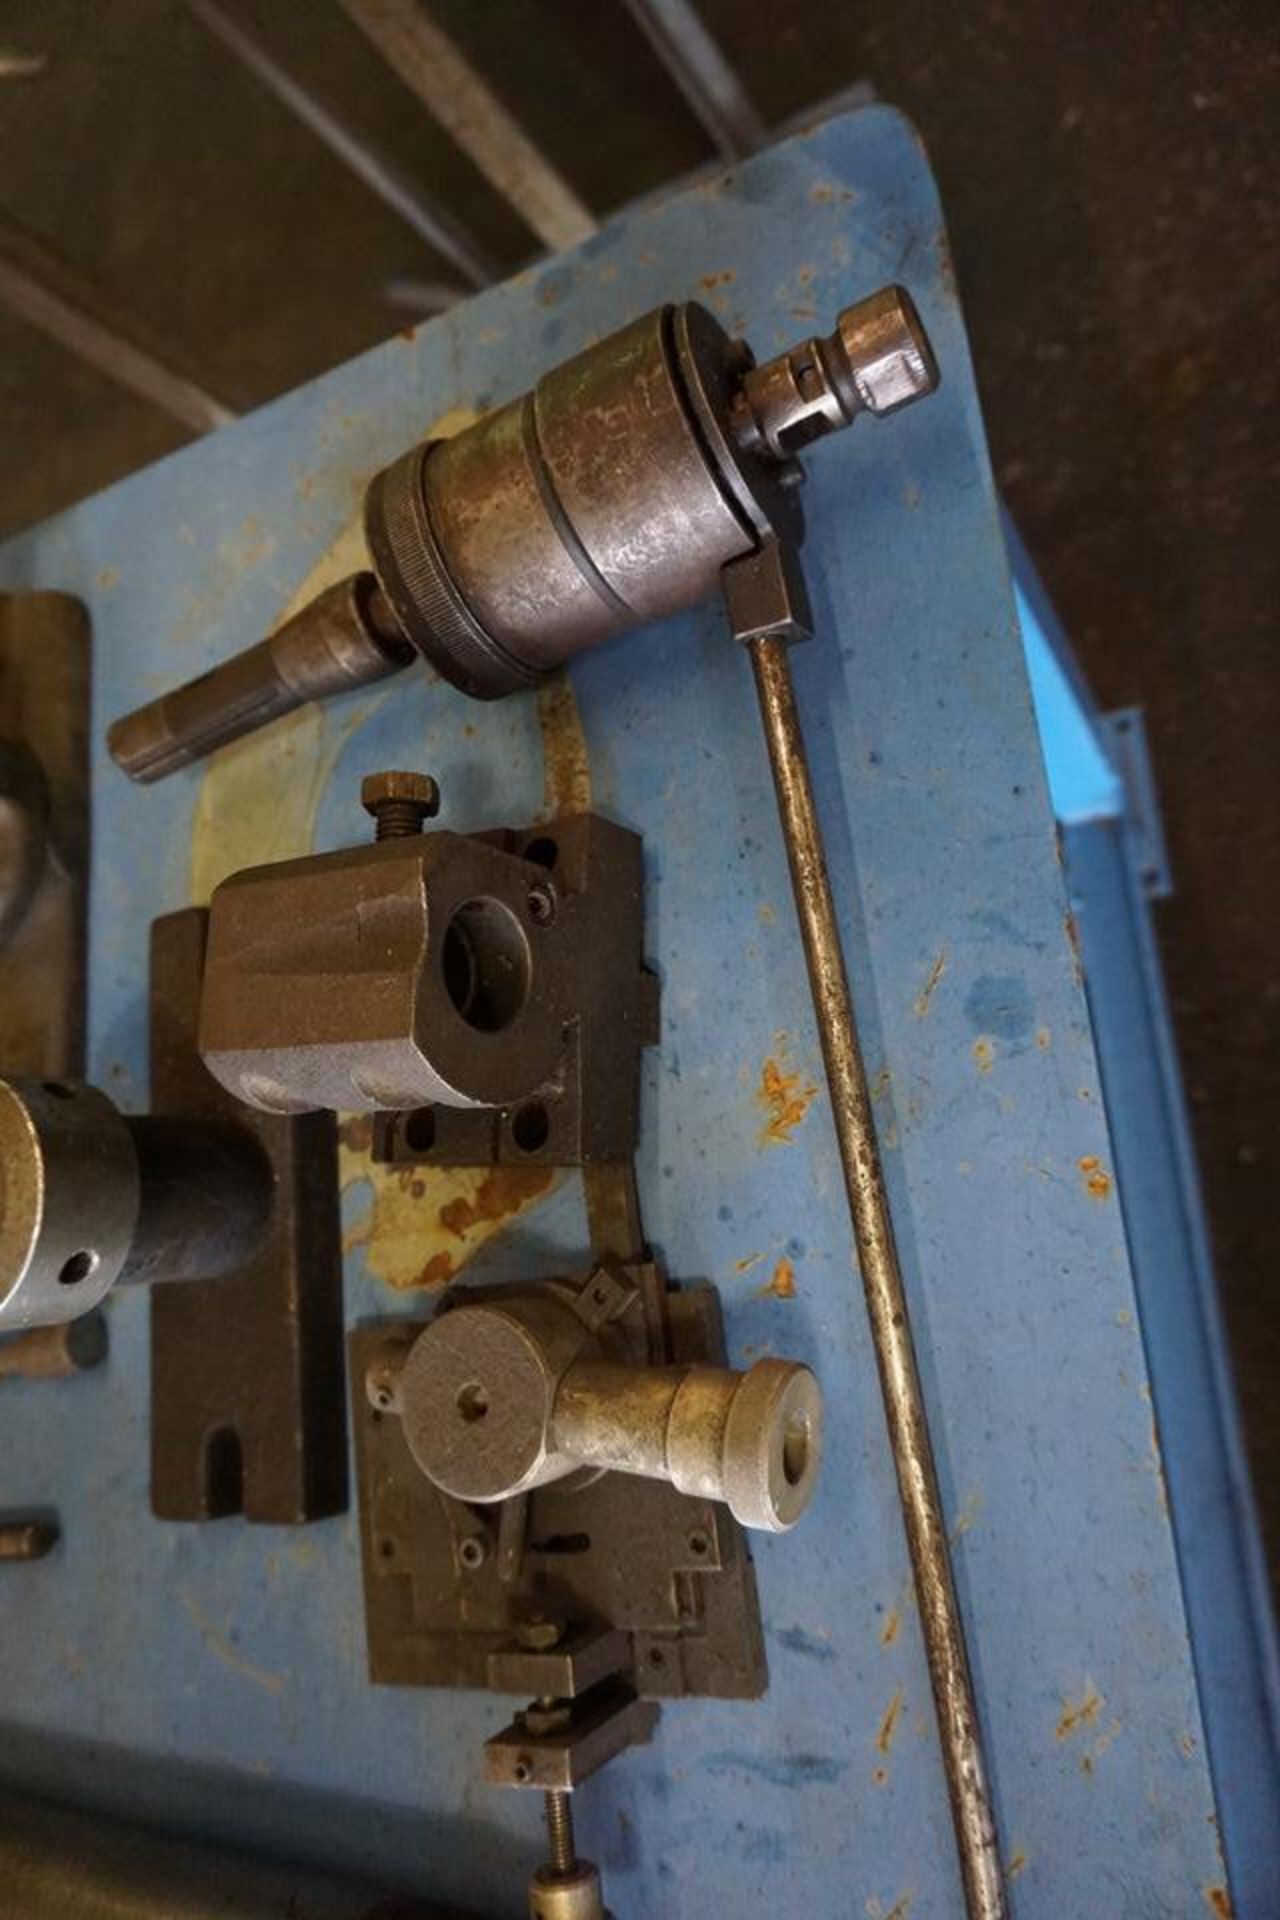 STEEL TABLE W/ CONT: TAILSTOCK, FOLLOW REST,BORING HEAD, MISC AS SHOWN - Image 8 of 8